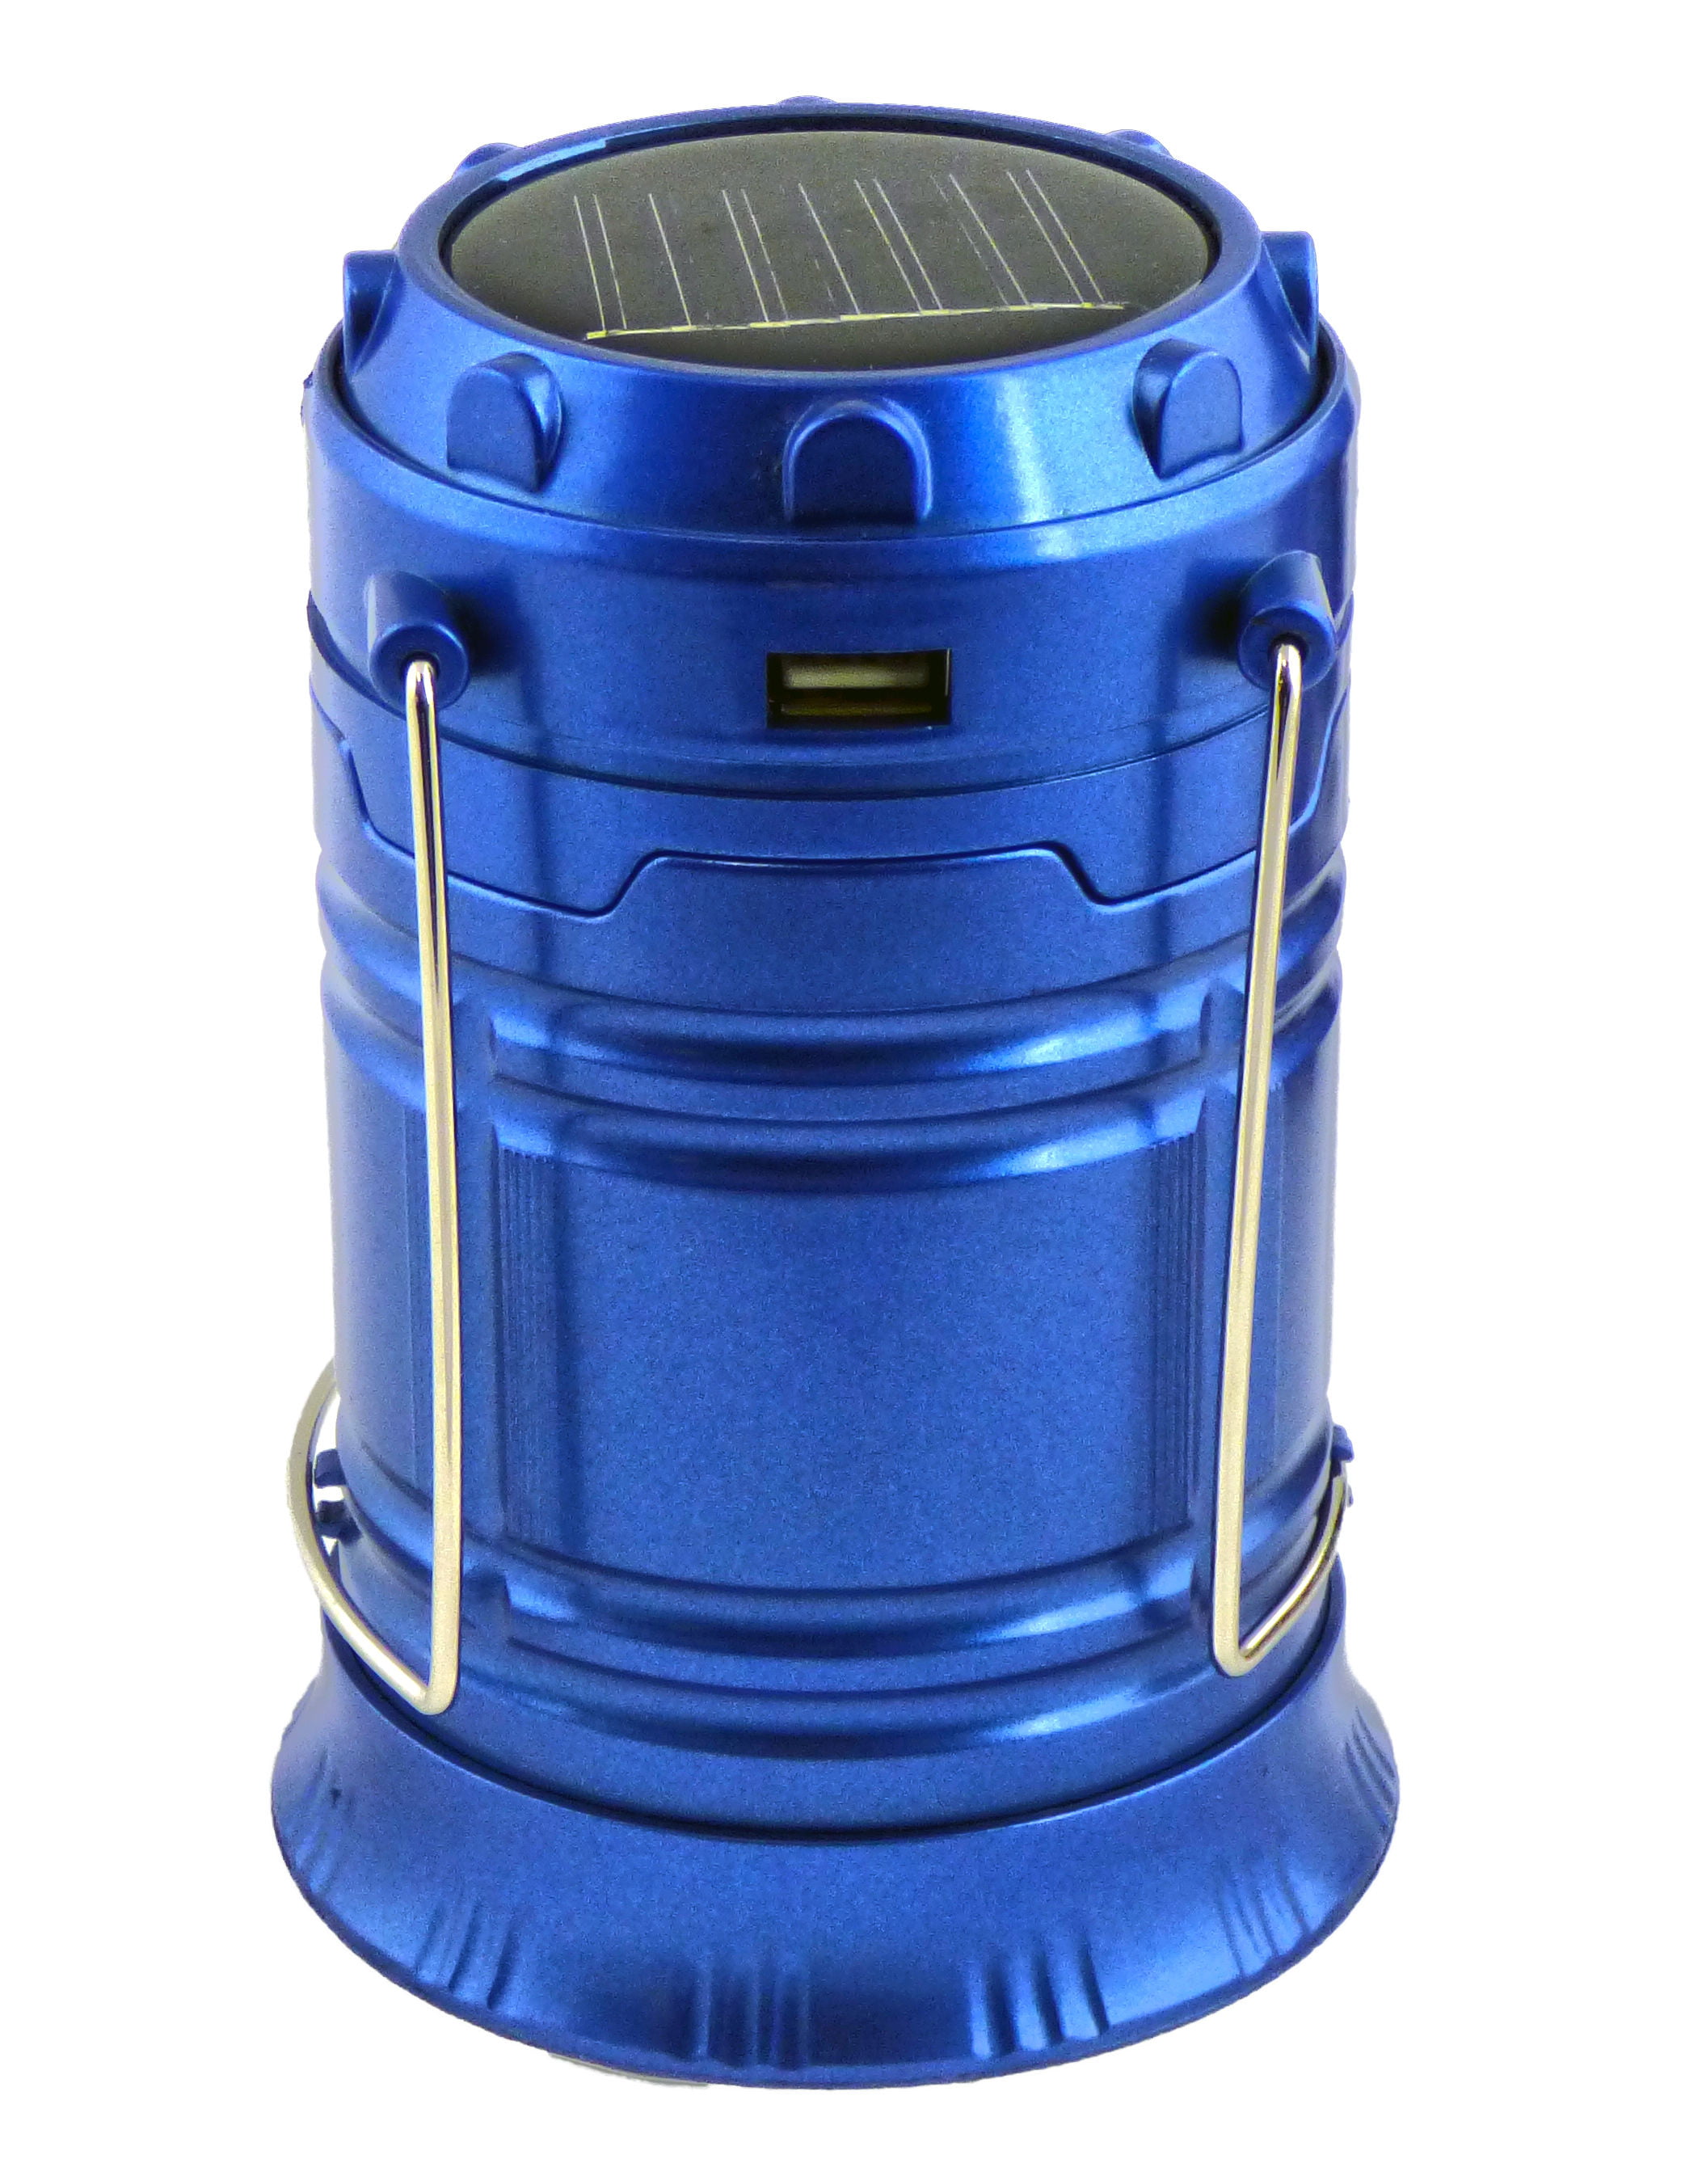 NEW - IMPROVED 3-in-1 Solar Collapsible Lantern | JPIN Supply